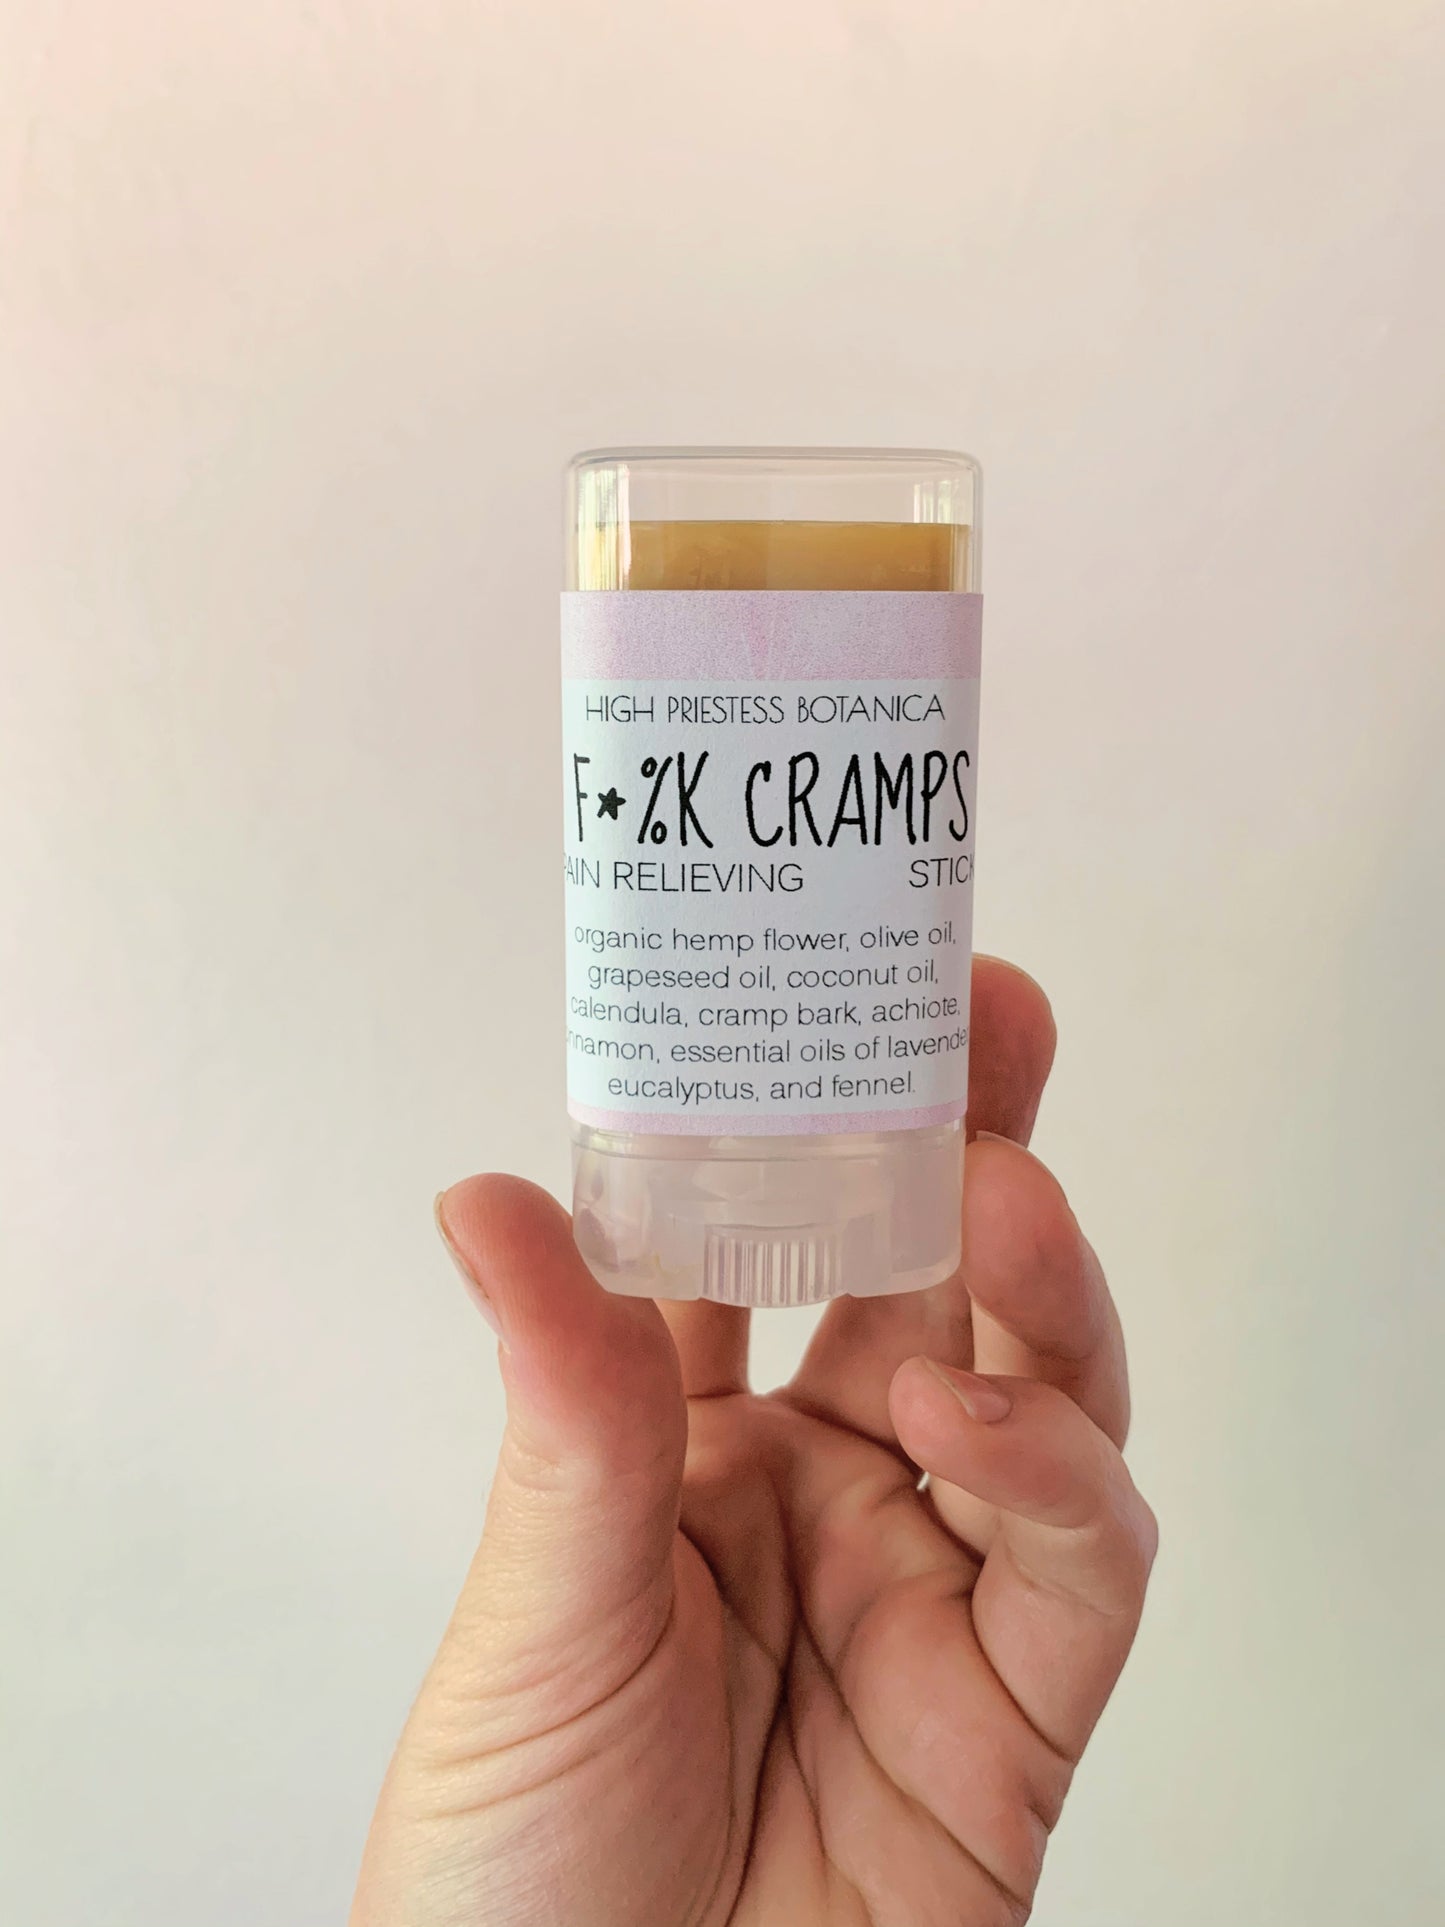 F*%K Cramps Pain Relieving Stick